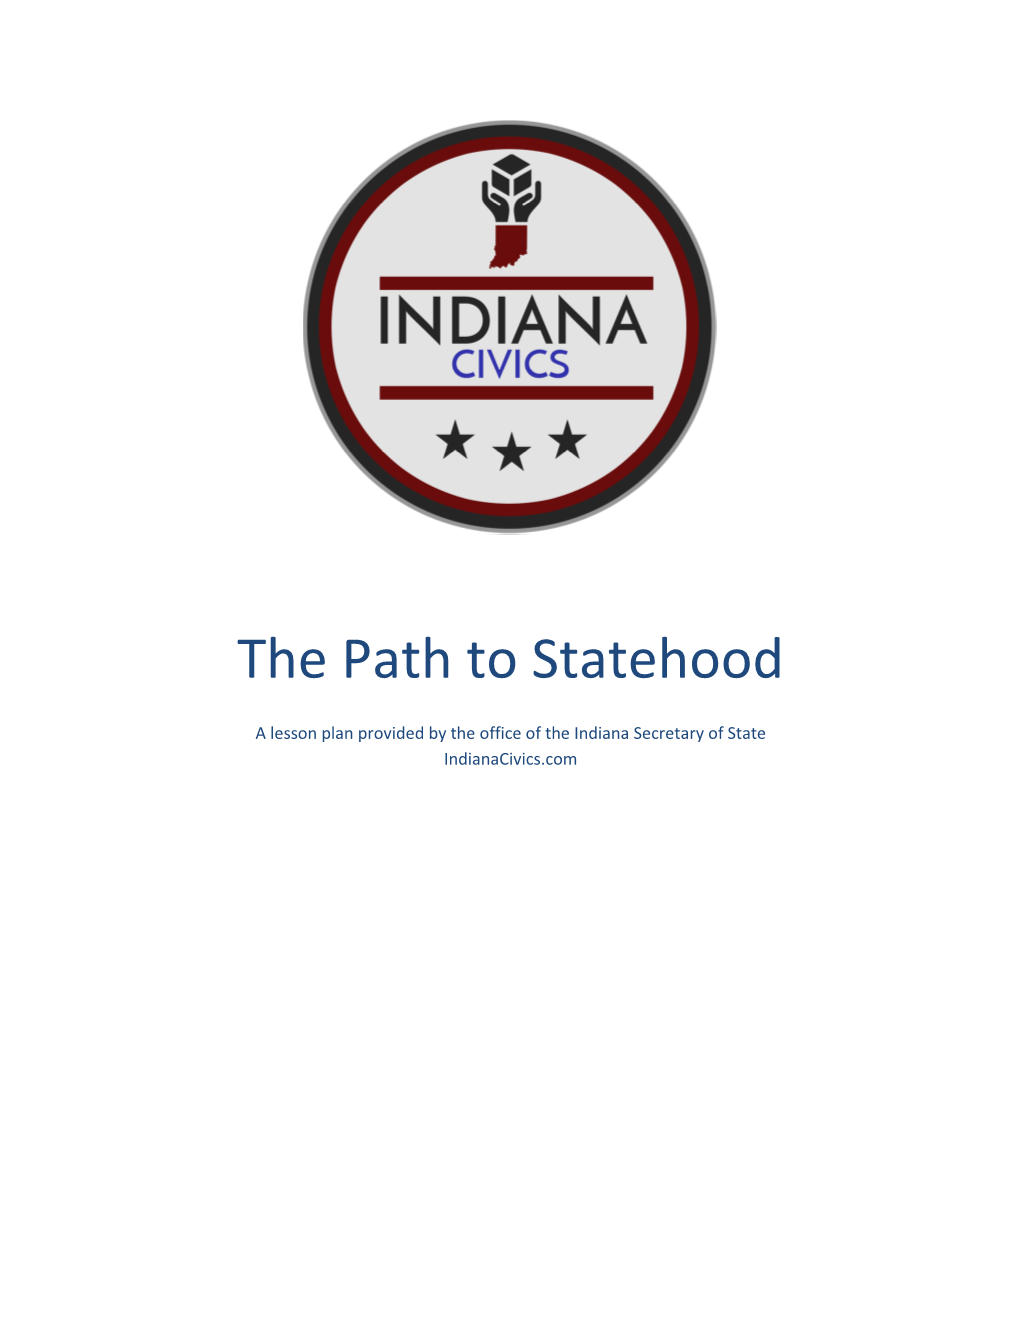 The Path to Statehood